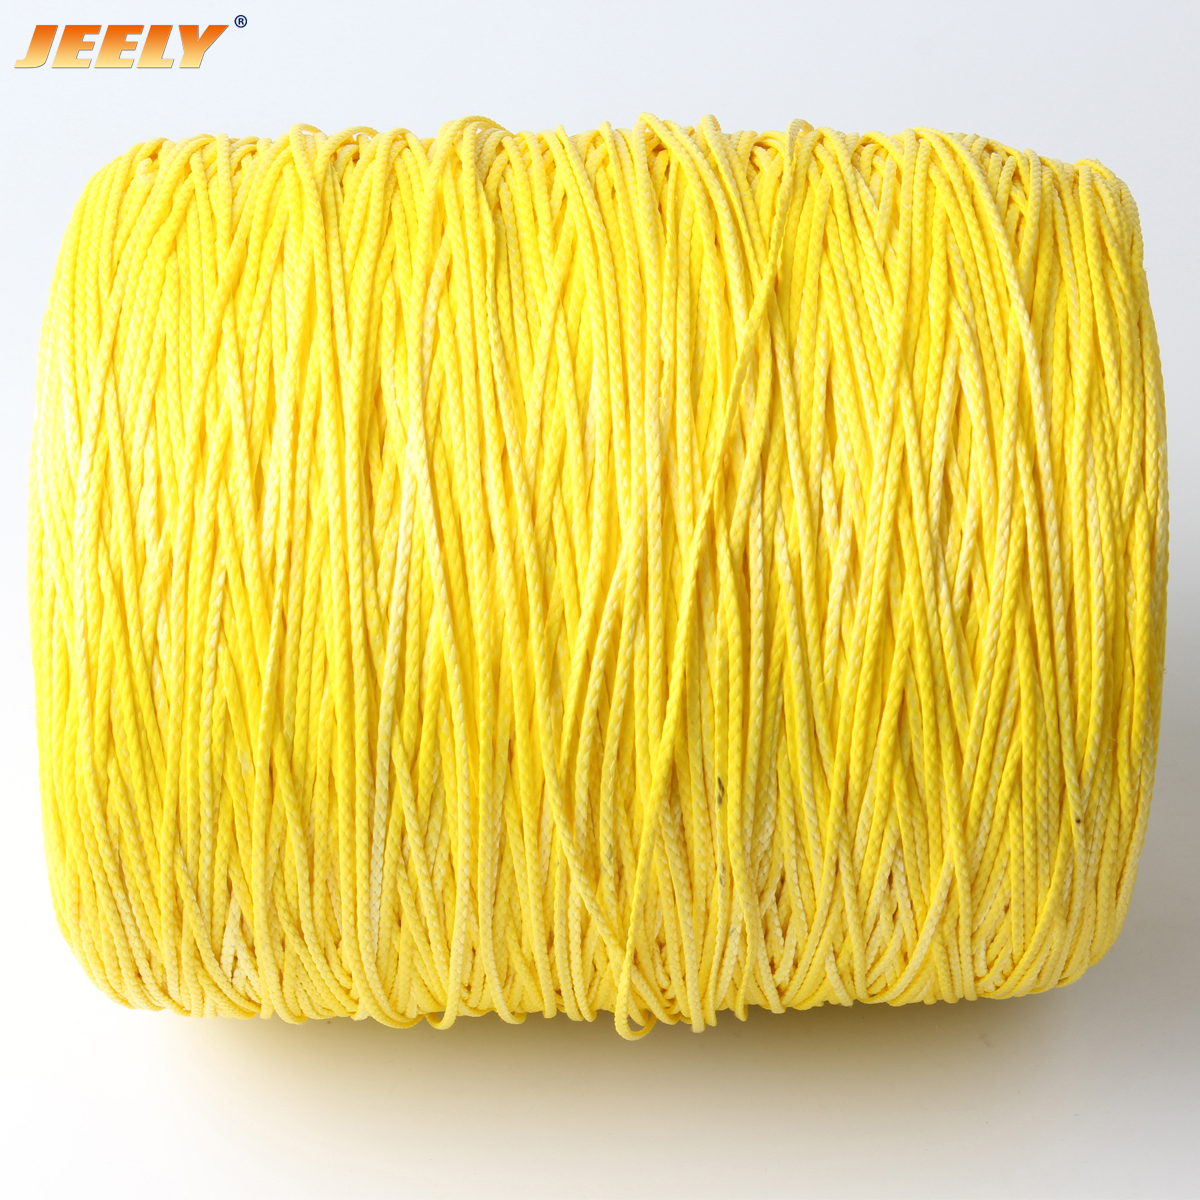 Jeely 1000M 1mm 6 Weaves Braided Towing Winch Line Spectra winch Rope 220lbs